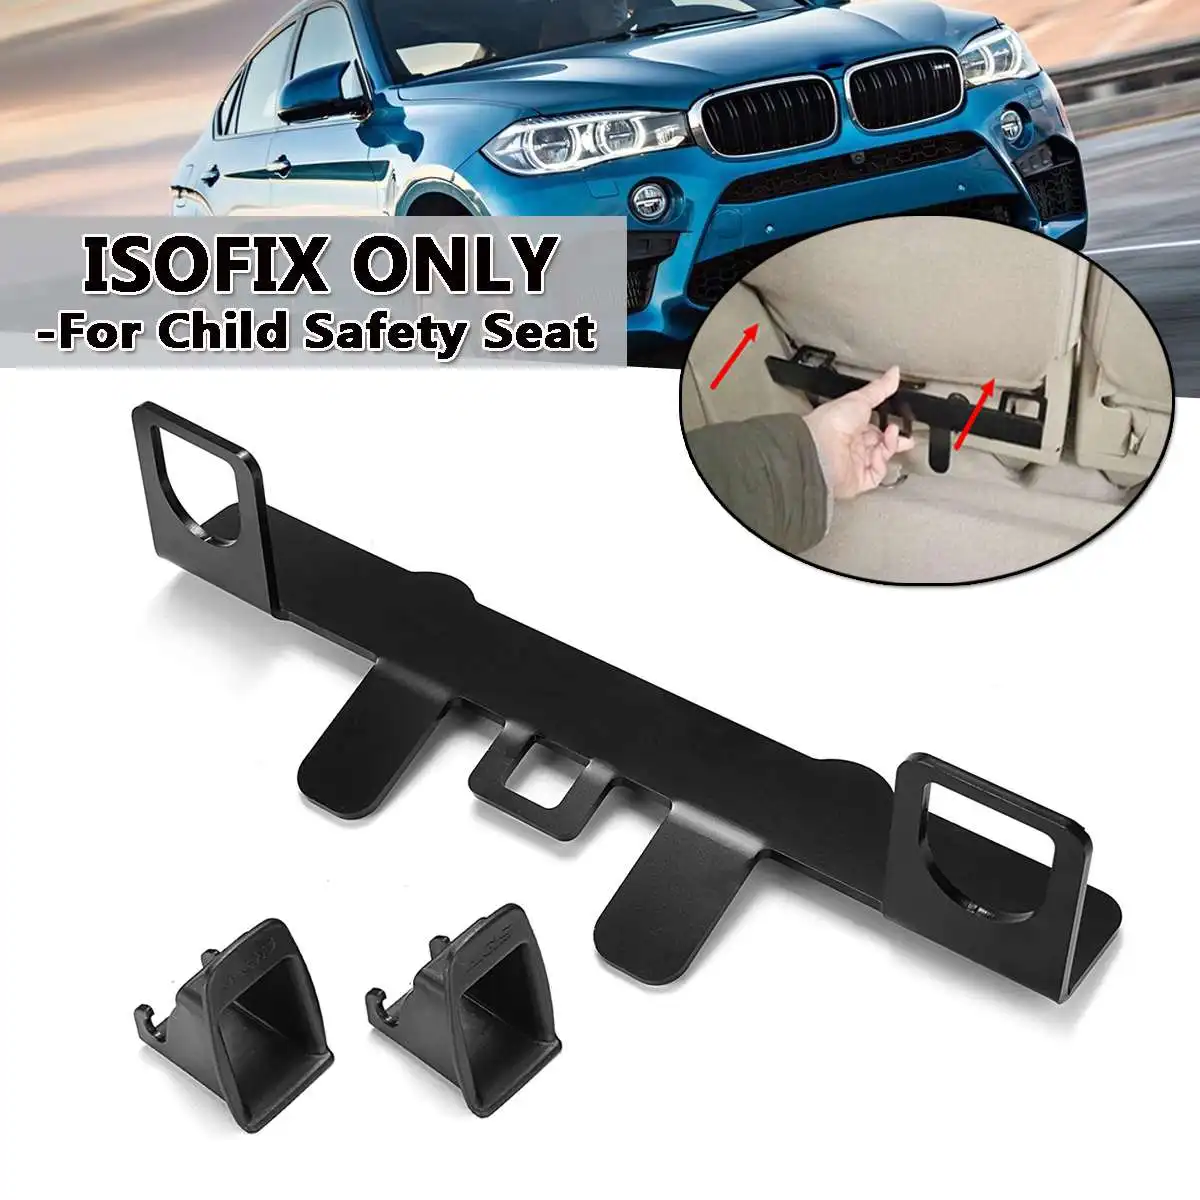 New Car ISOFIX Latch Connector Interfaces Bracket For Child Safety Seat New Seat Belt Buckle Bracket Guide Stand Holder